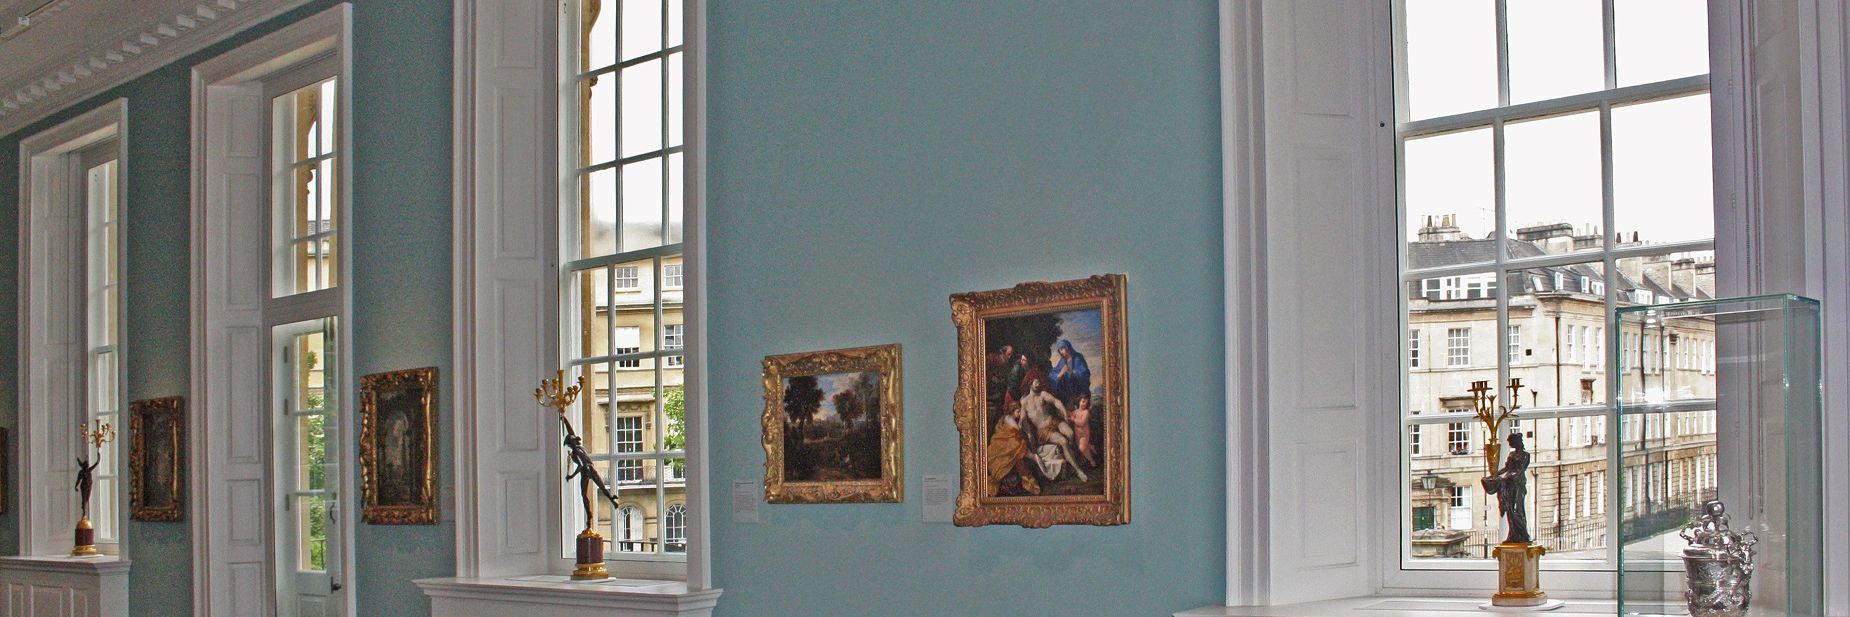 How Selectaglaze is protecting ‘heritage artworks and objects of beauty’ at two museums in Listed buildings